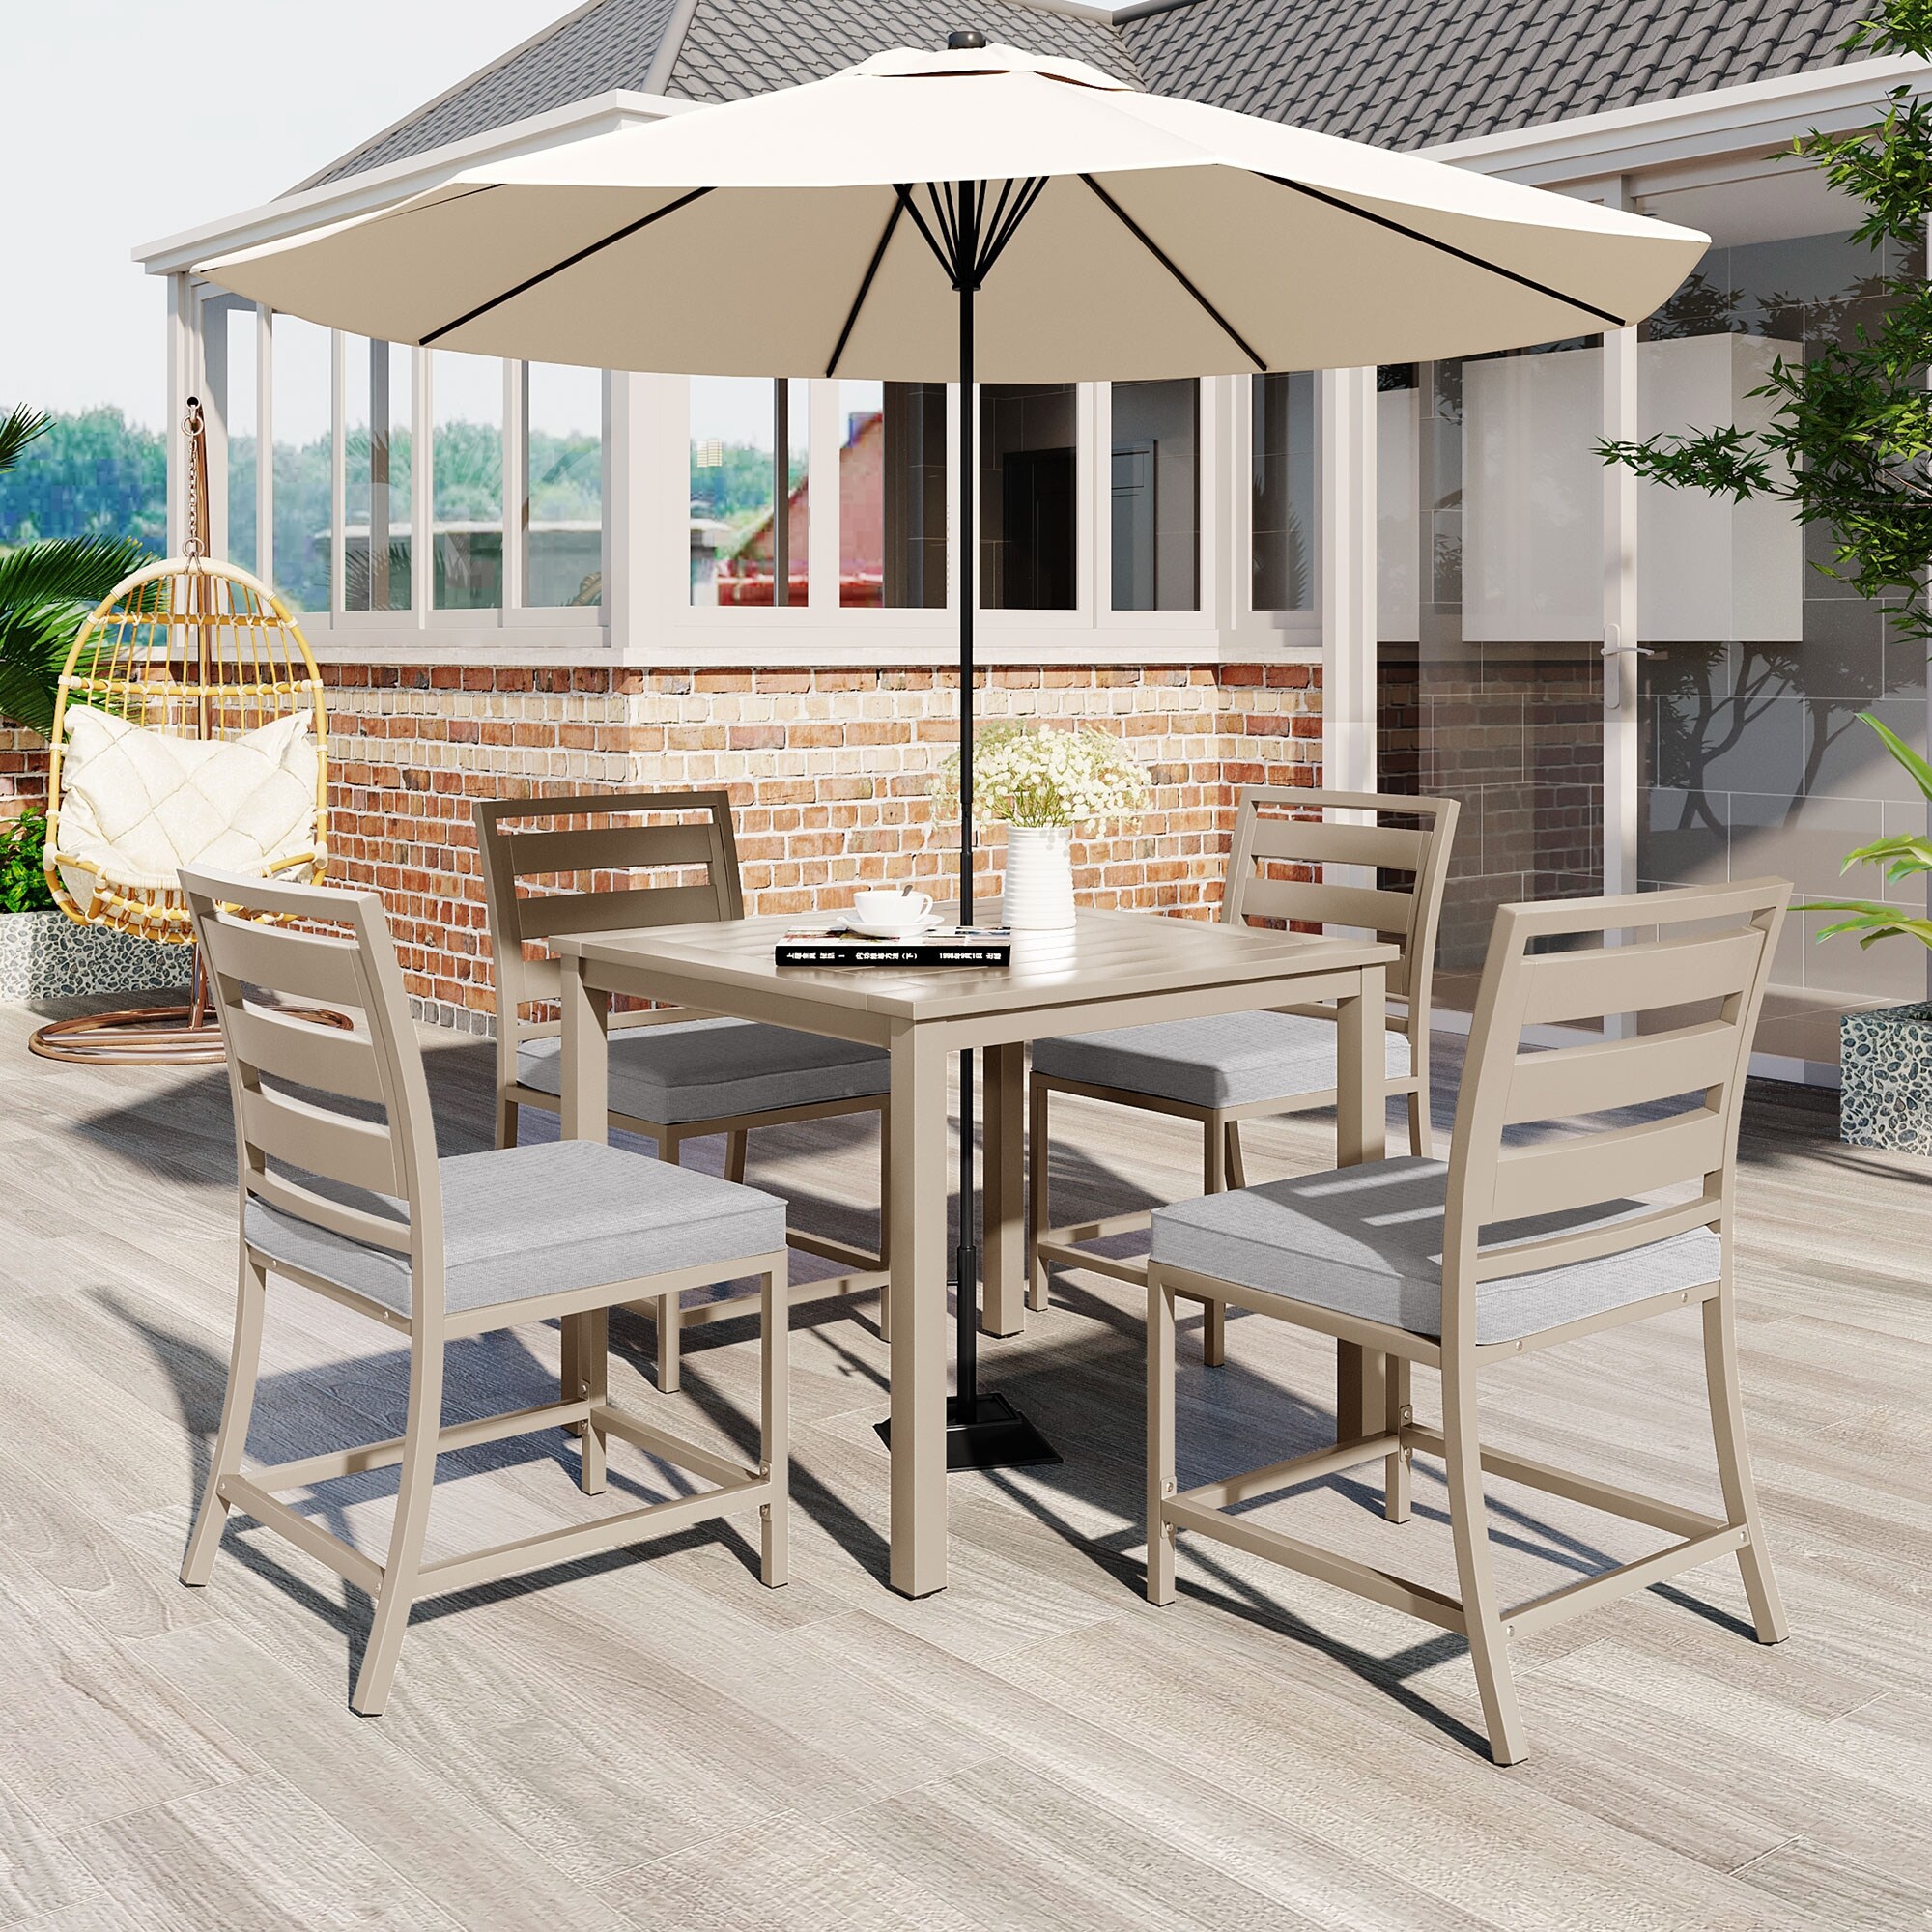 Outdoor Four-person Dining Table And Chairs grey